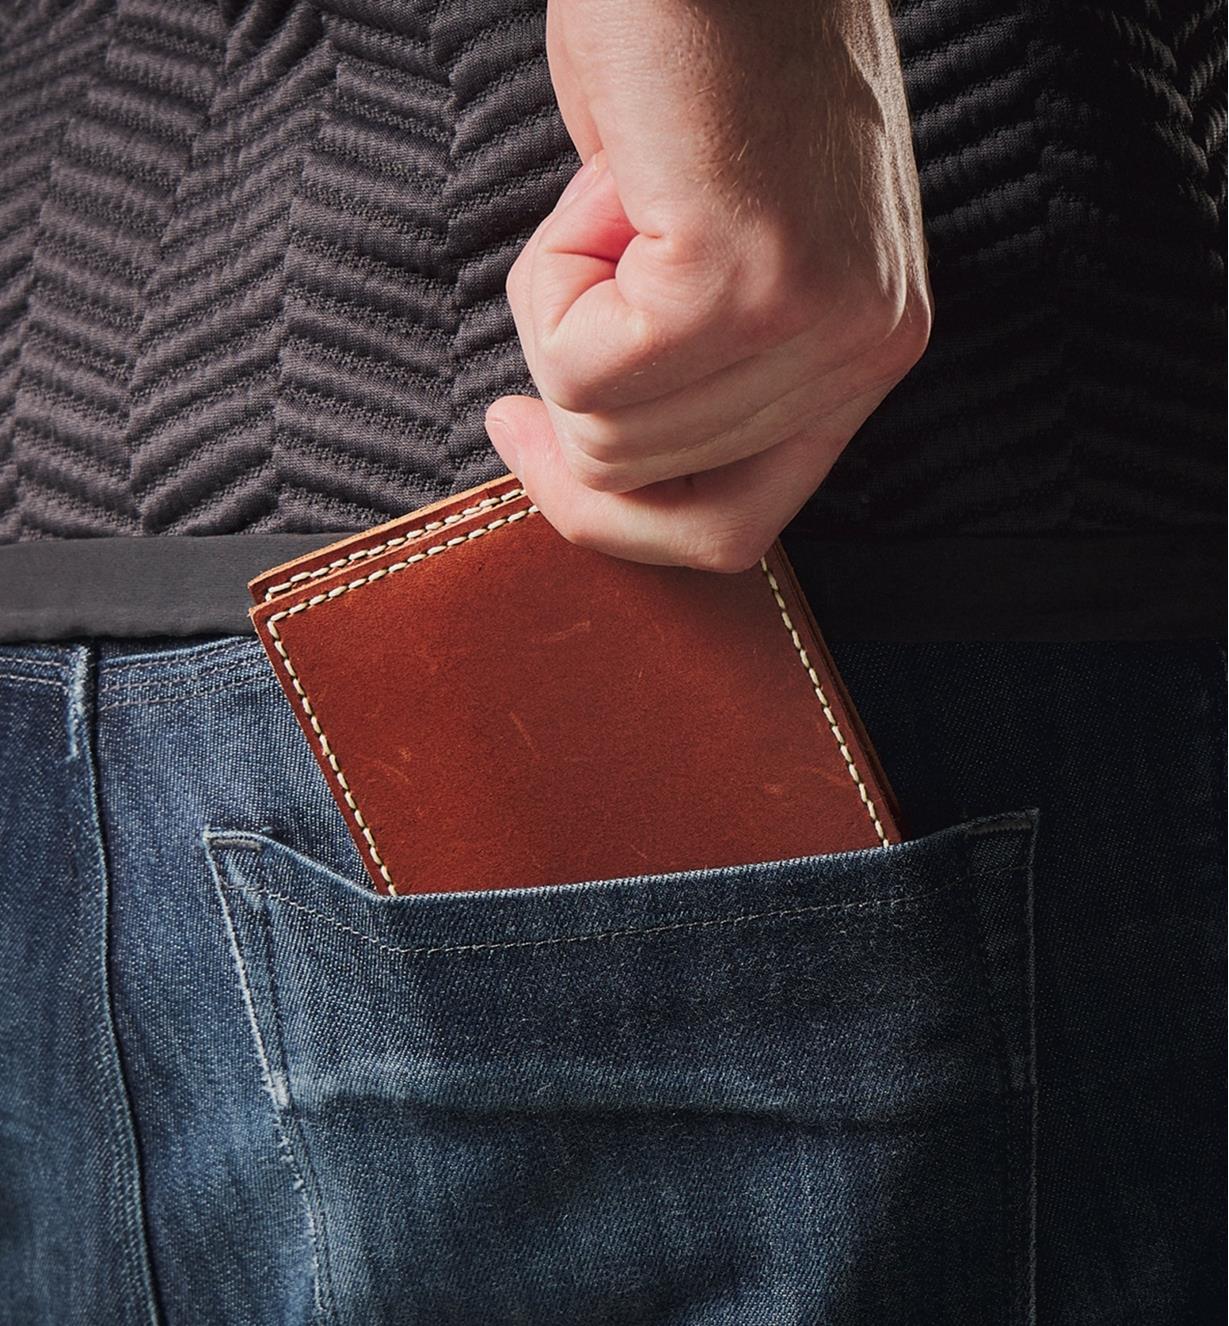 Putting a leather wallet into a back pants pocket